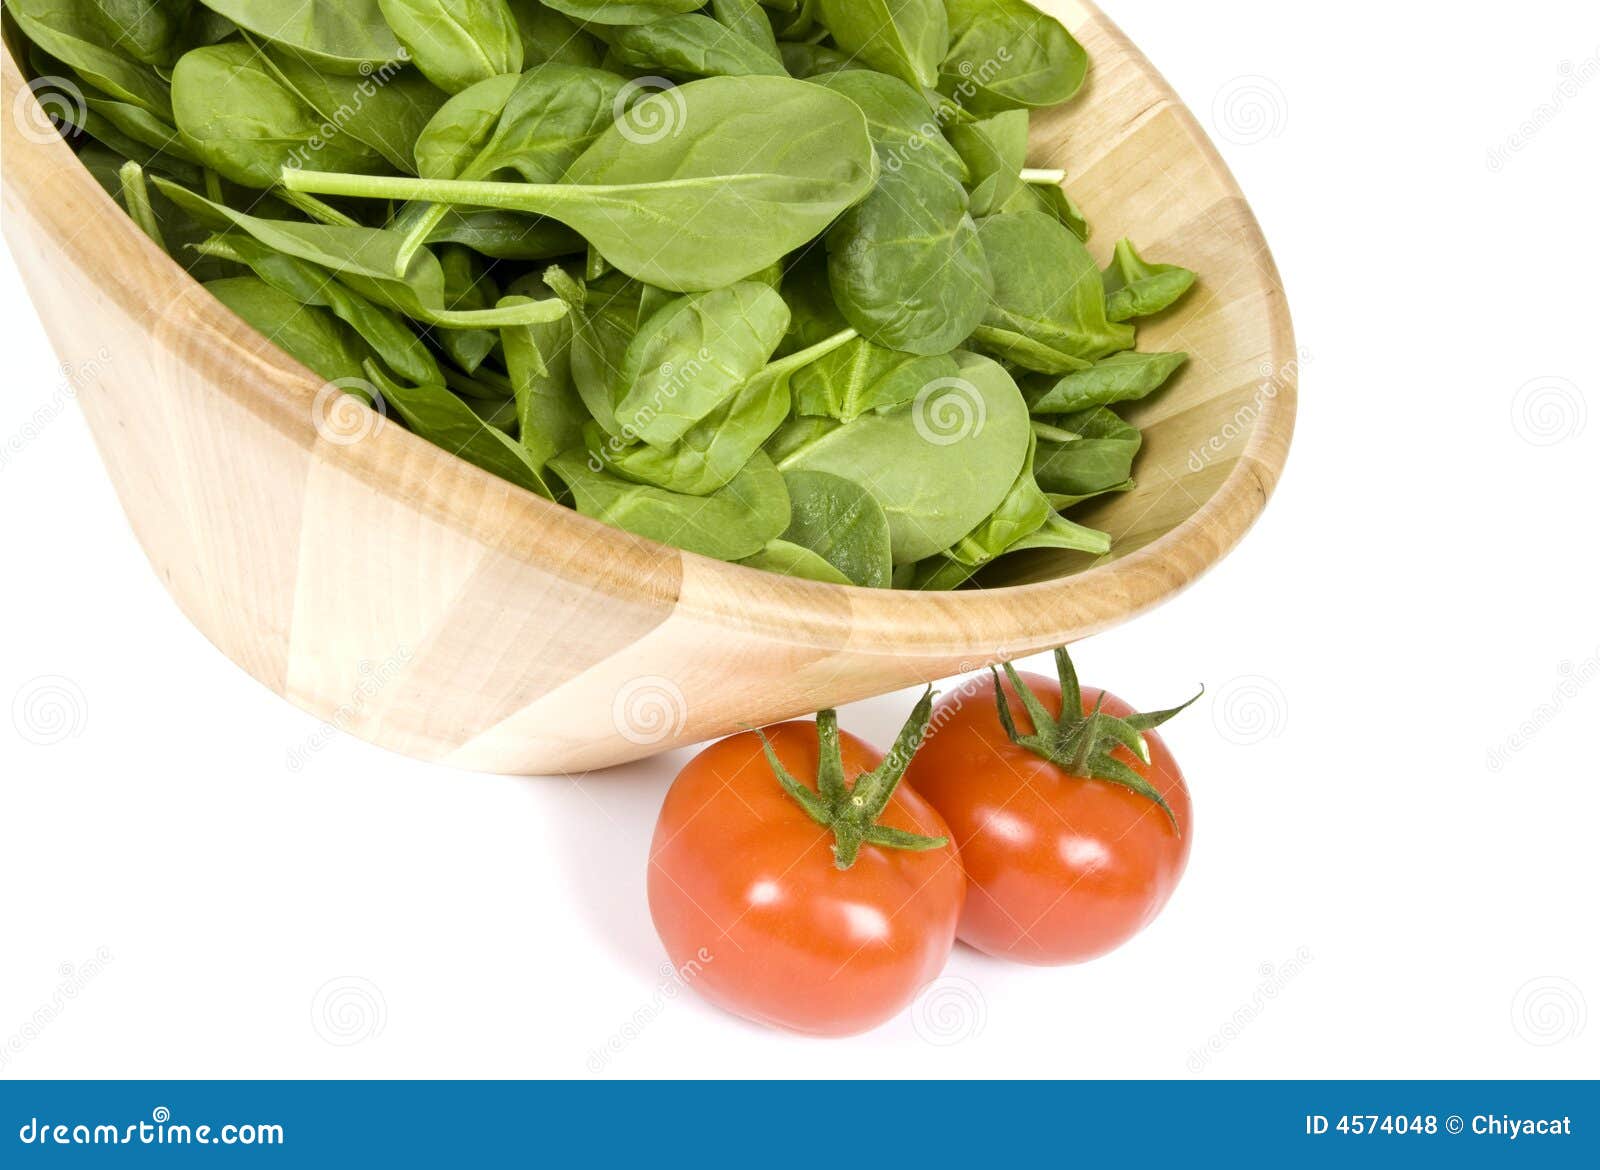 baby spinach and vine ripen tomatoes